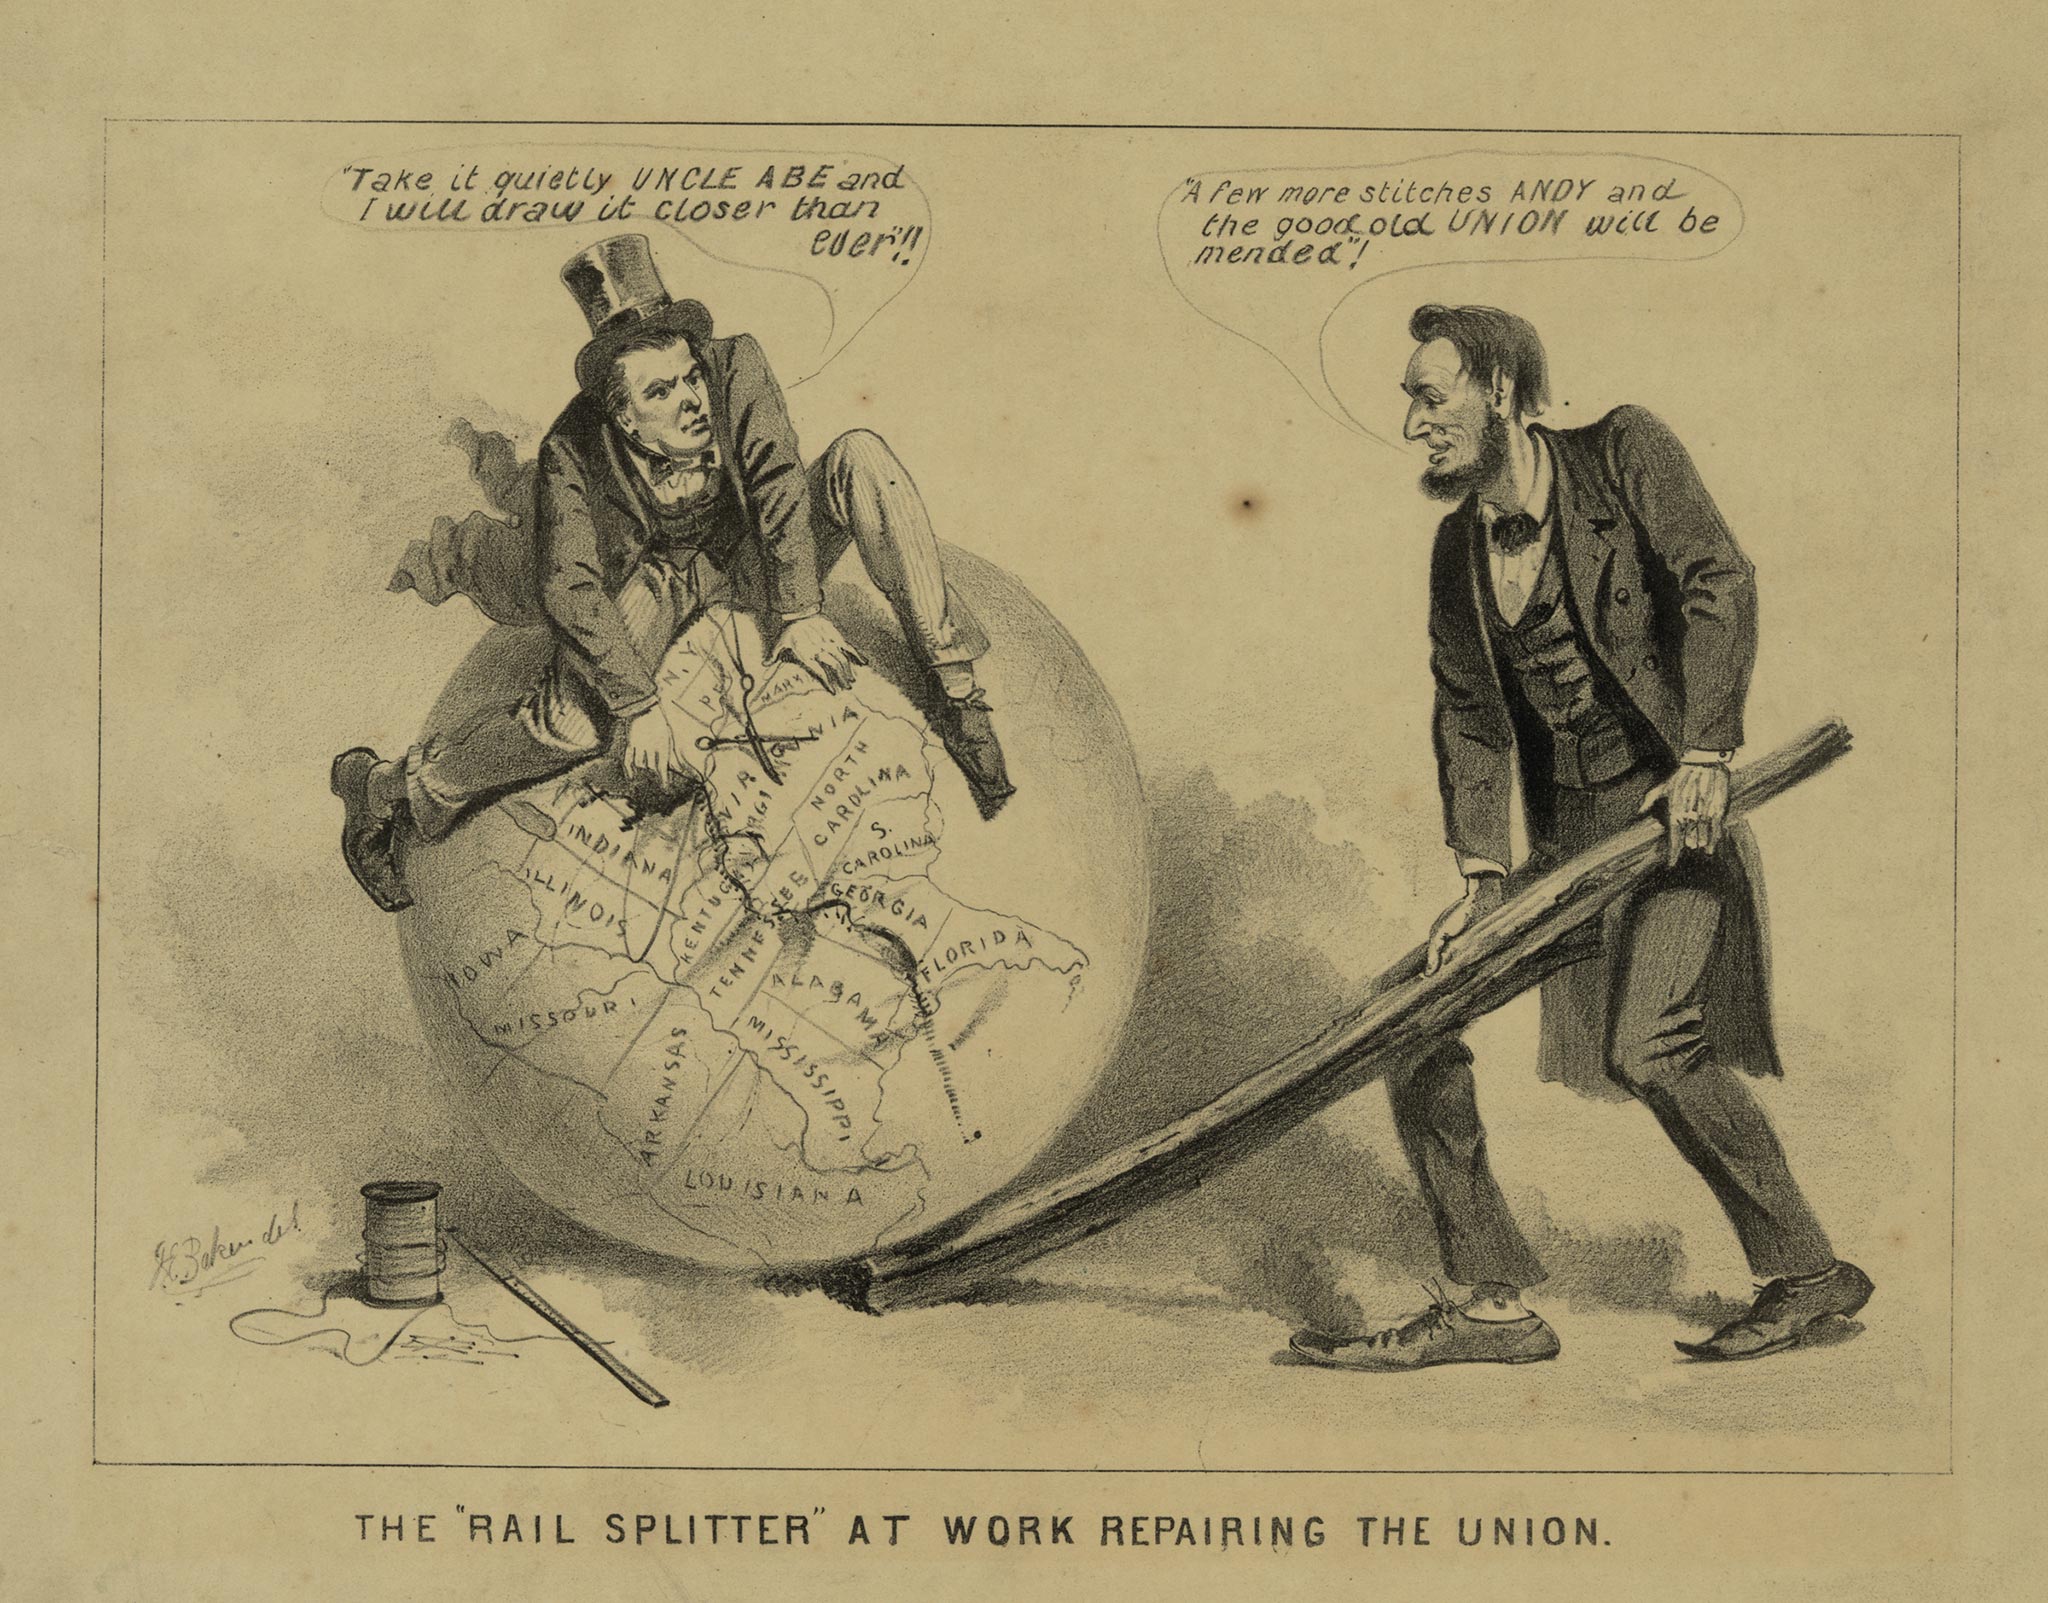 Joseph E. Baker, “The ‘Rail Splitter’ at Work Repairing the Union,” 1865. Library of Congress. Lincoln and Johnson—presidential reconstruction